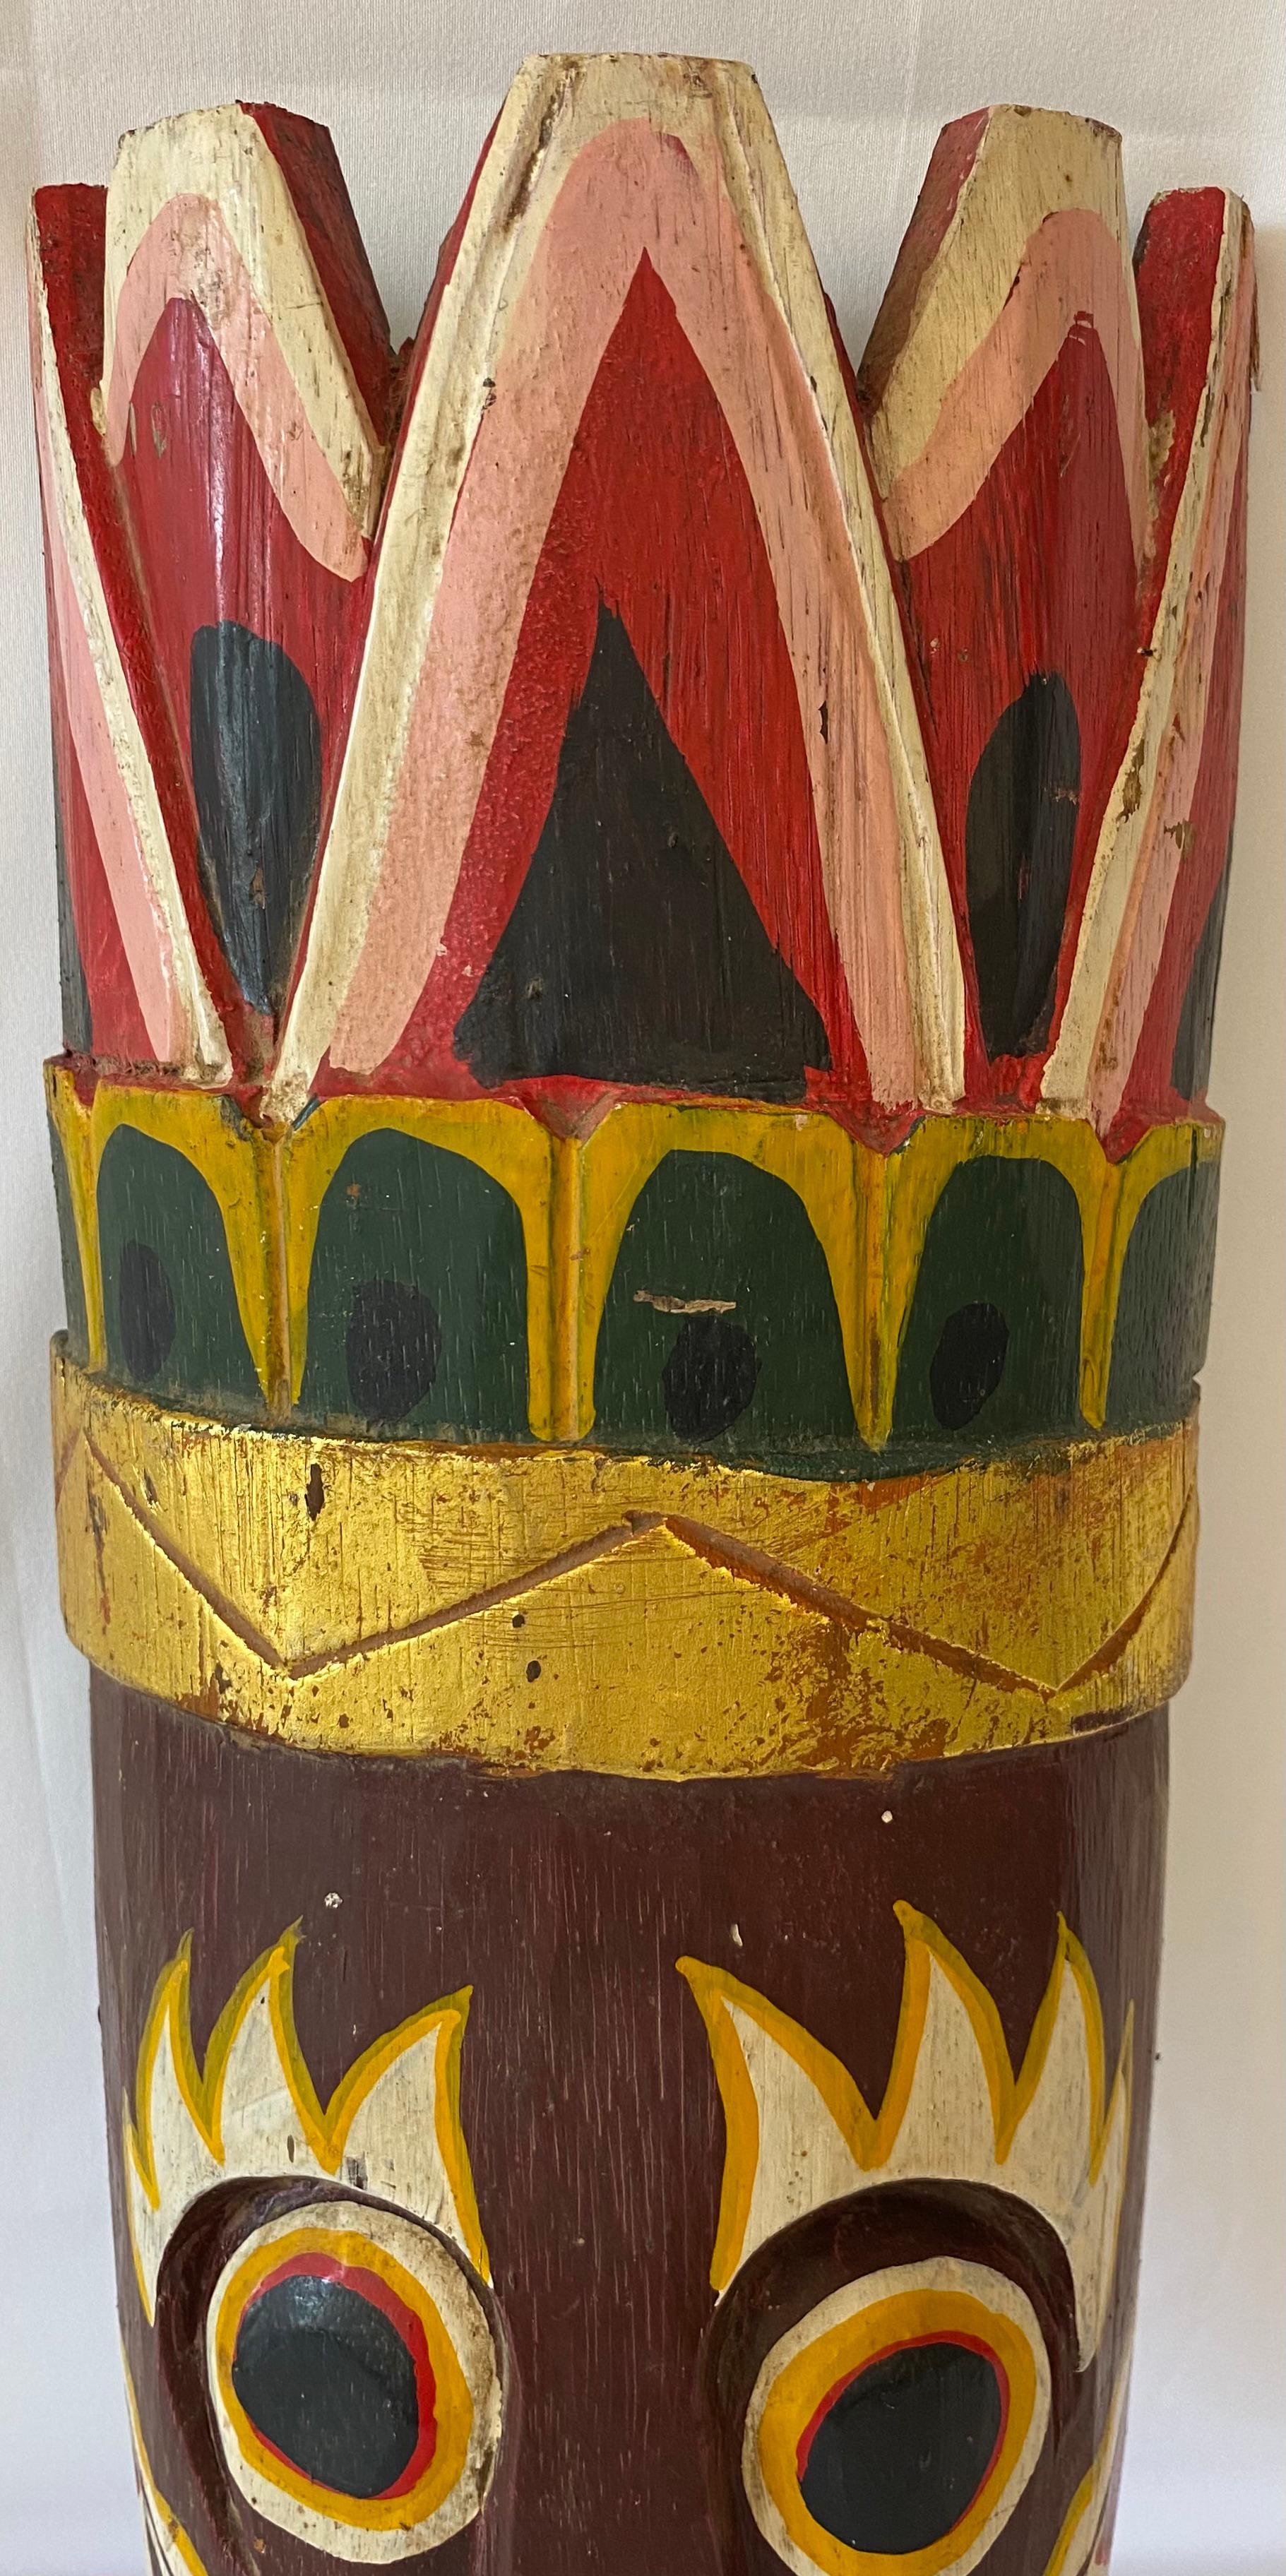 A generously sized wooden tribal mask. 

Hand-carved and painted this decorative mask that would look great in a western or country themed setting. 

Measures: 19